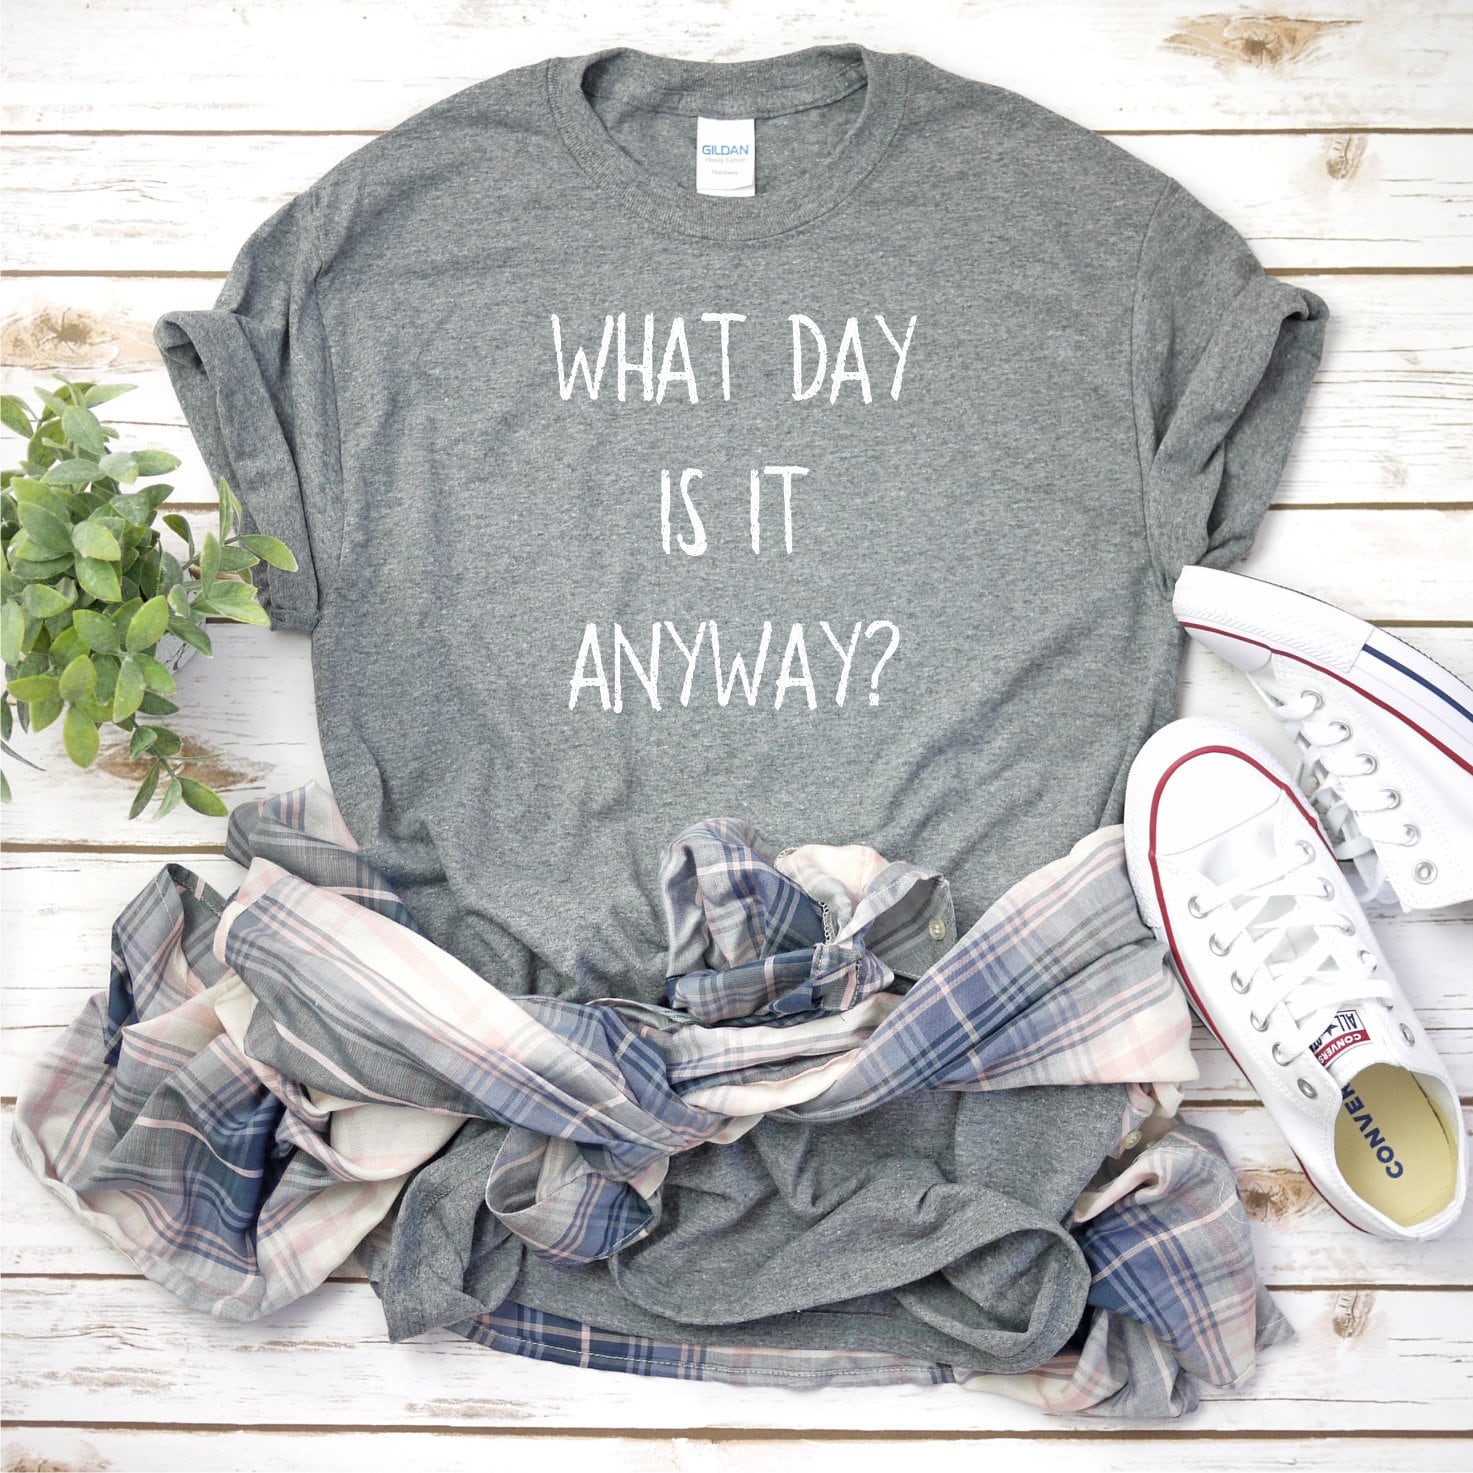 What Day Is It. Woman's Tri-Blend Super Soft Shirt in V-Neck Or Crew